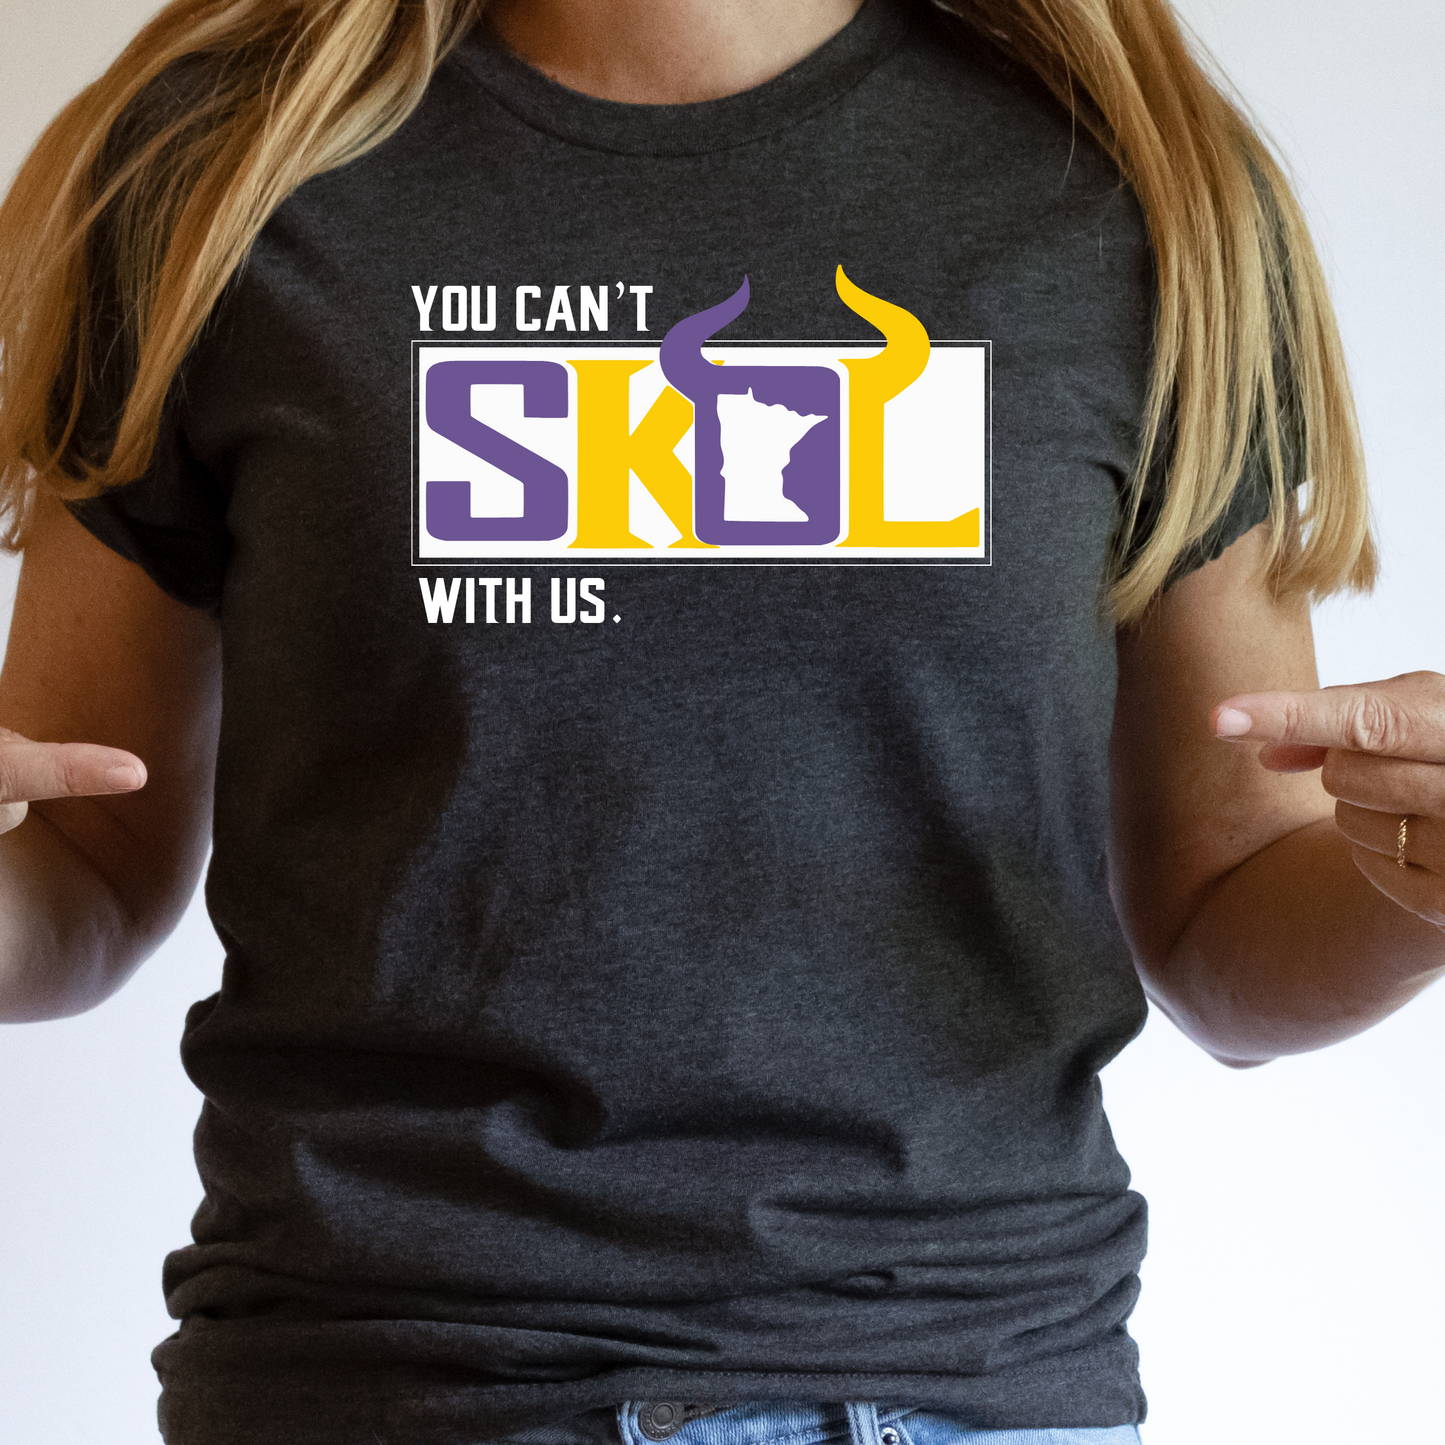 YOU CANT SKOL WITH US - PICK FROM 200 COLOR & STYLE OPTIONS! - TAT 4-7 DAYS